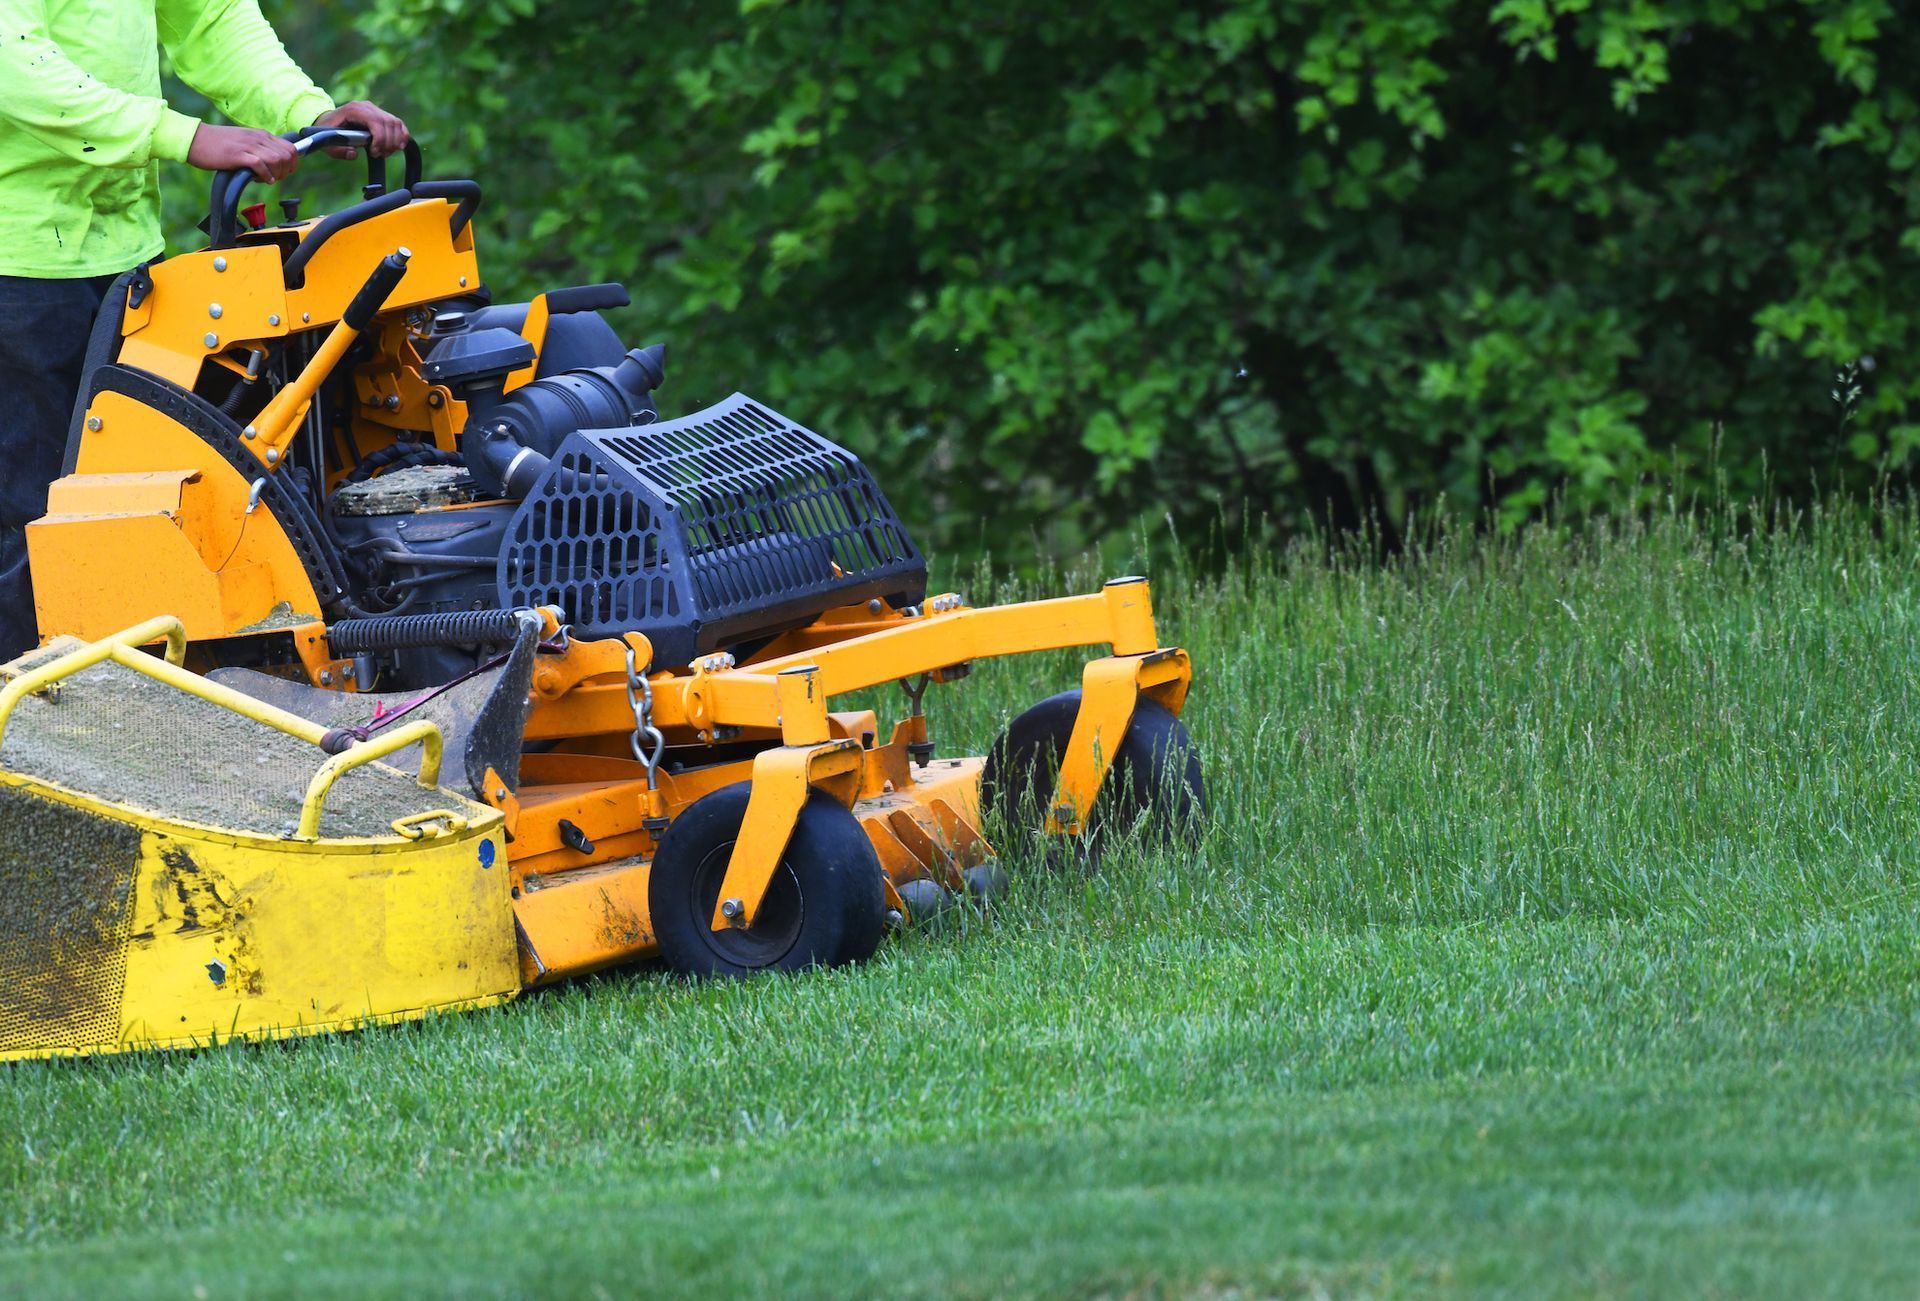 A man is riding a yellow lawn mower on a lush green lawn.